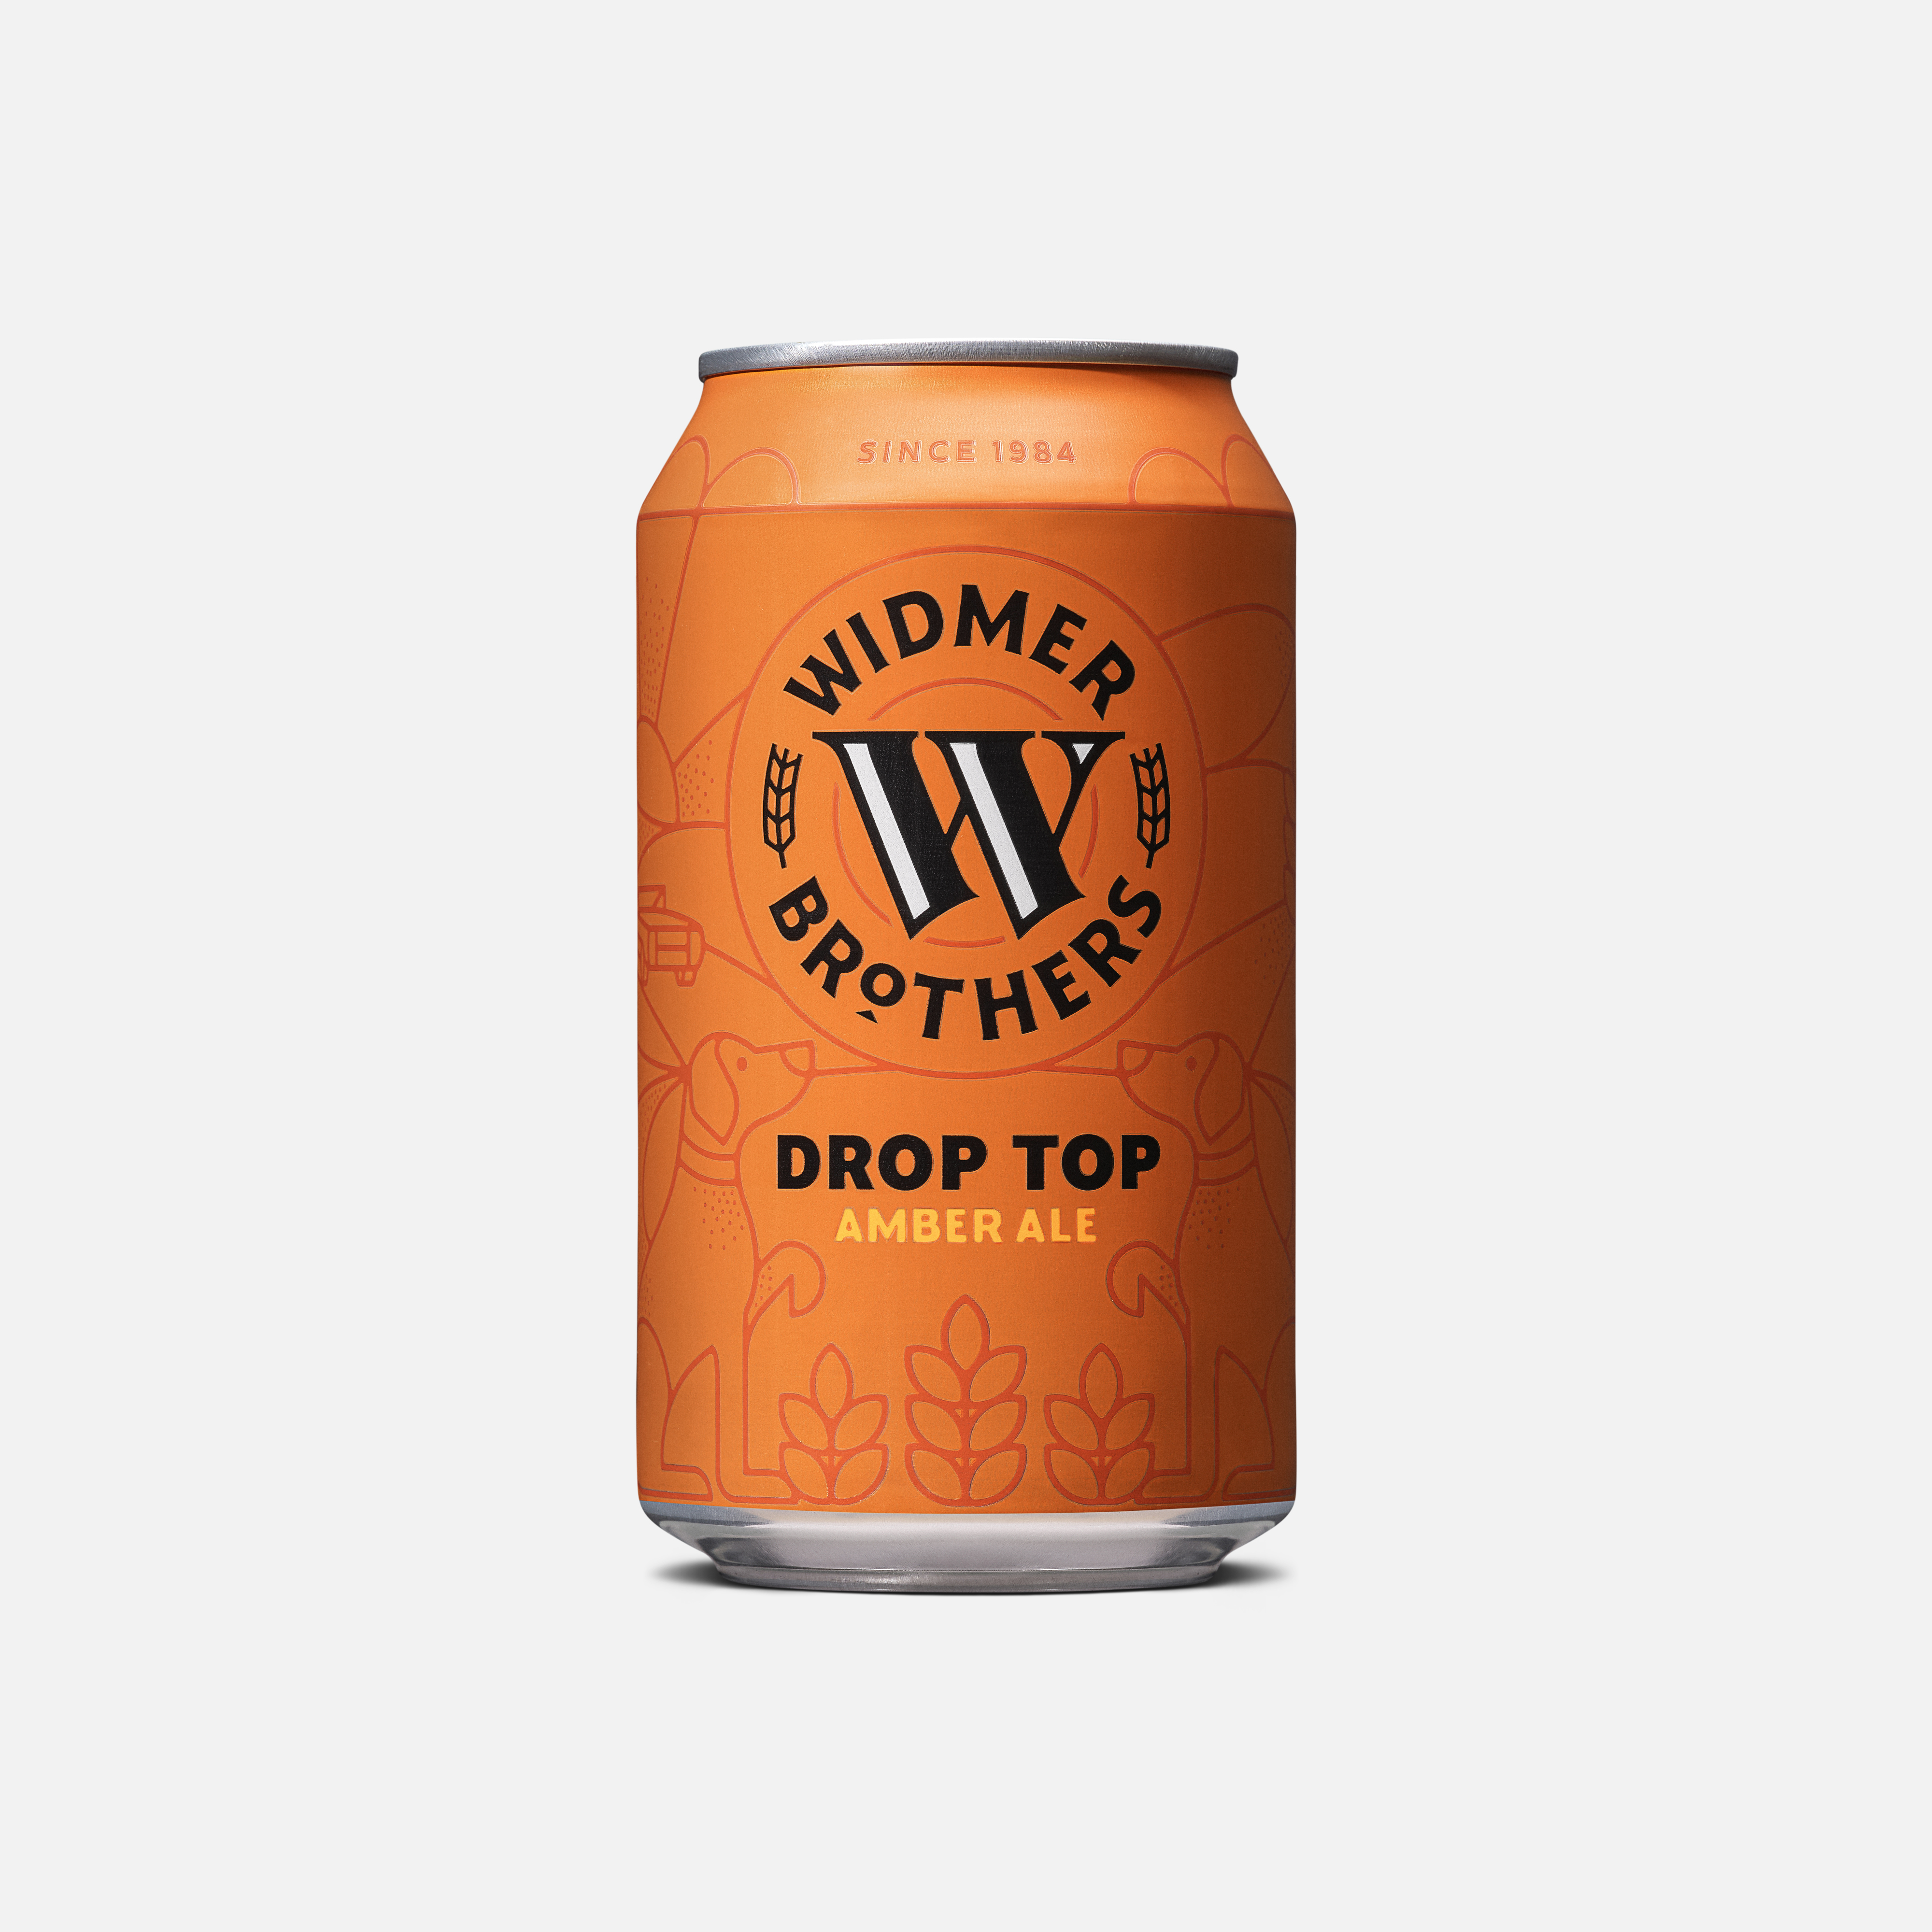 Product_DropTop_12oz_Can_2688